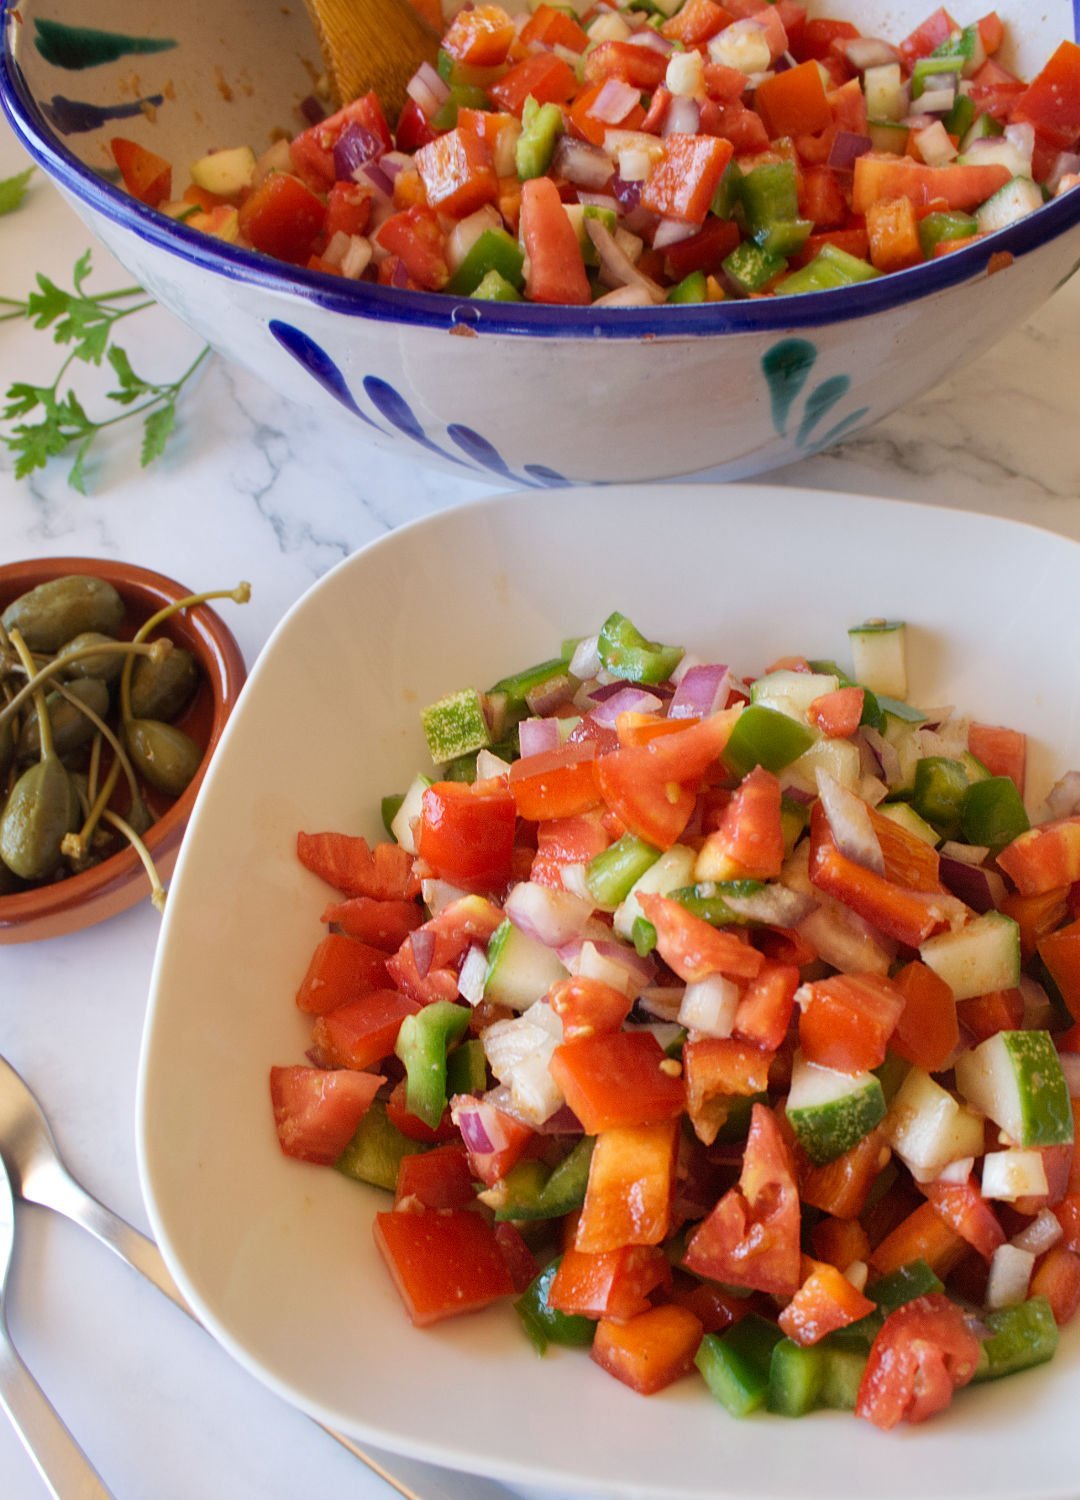 A large colorful bowl of Pipirrana Spanish Salad sits waiting to be served to a small white bowl